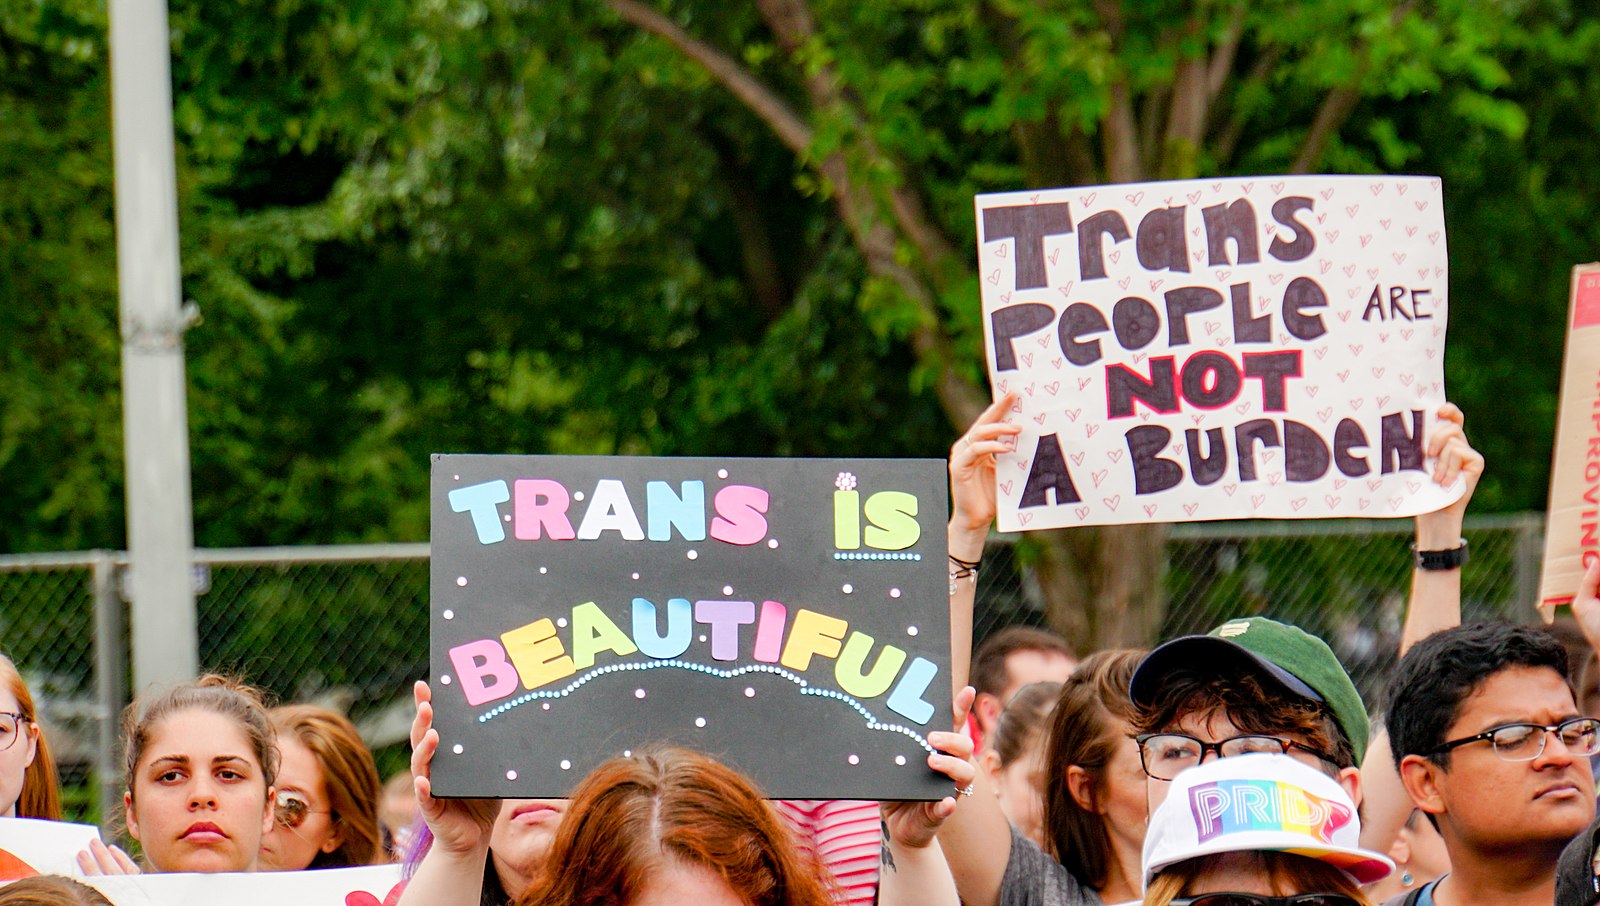 A group of people hold signs at a protest against military ban on transgender people. Two signs in focus read 